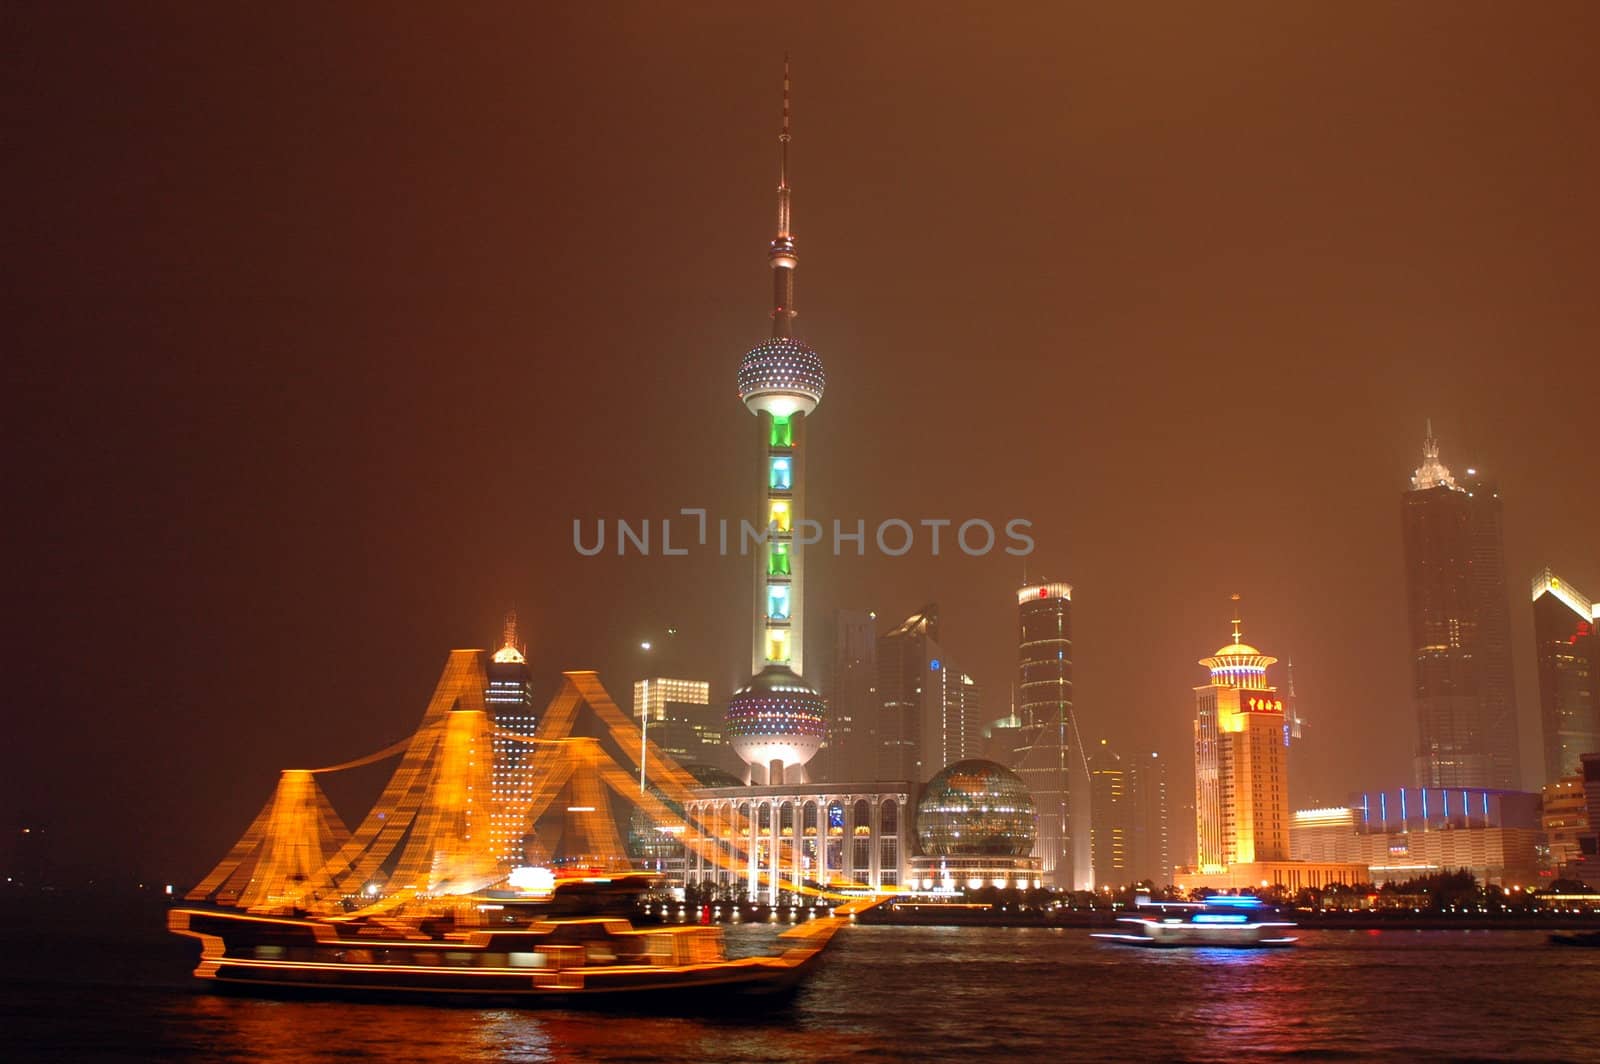 Shanghai with ship by night by bartekchiny